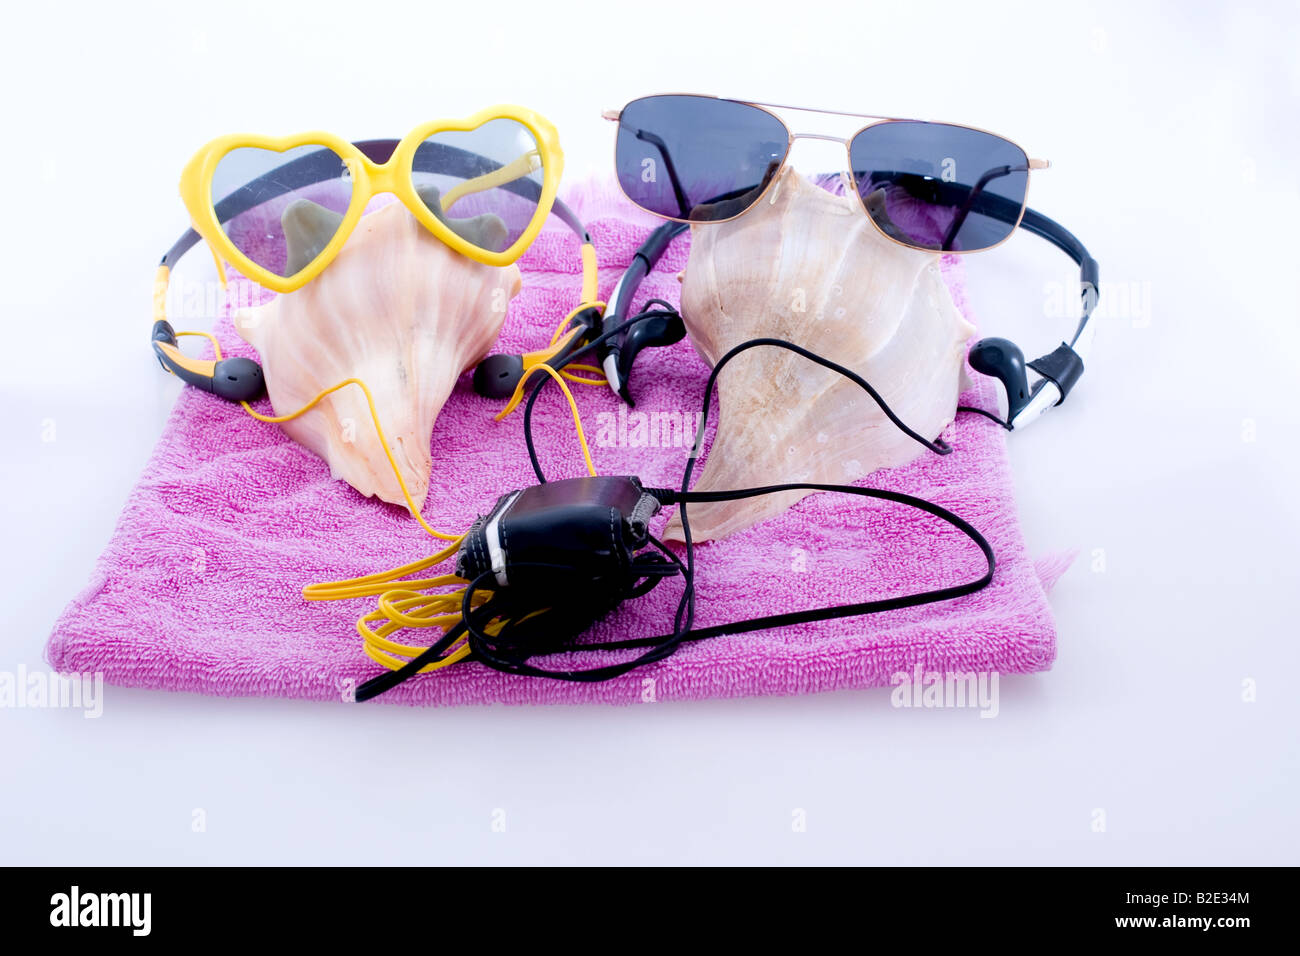 A  group of conch shells with sunglasses on a towel close together listening to an Mp3 player with headphones. Stock Photo